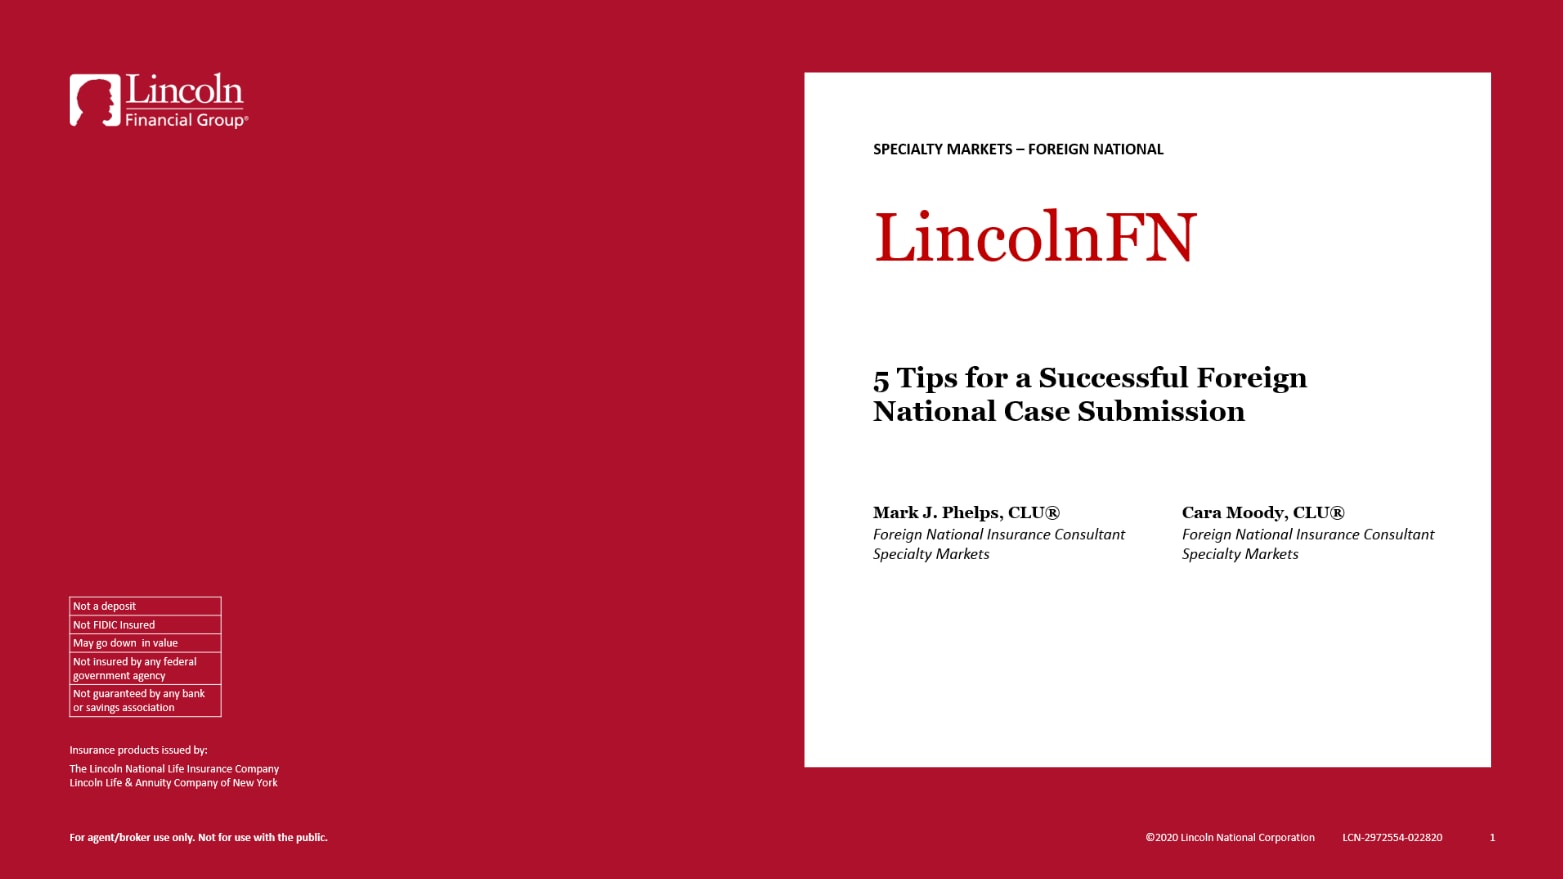 5 tips for a successful FN case submission